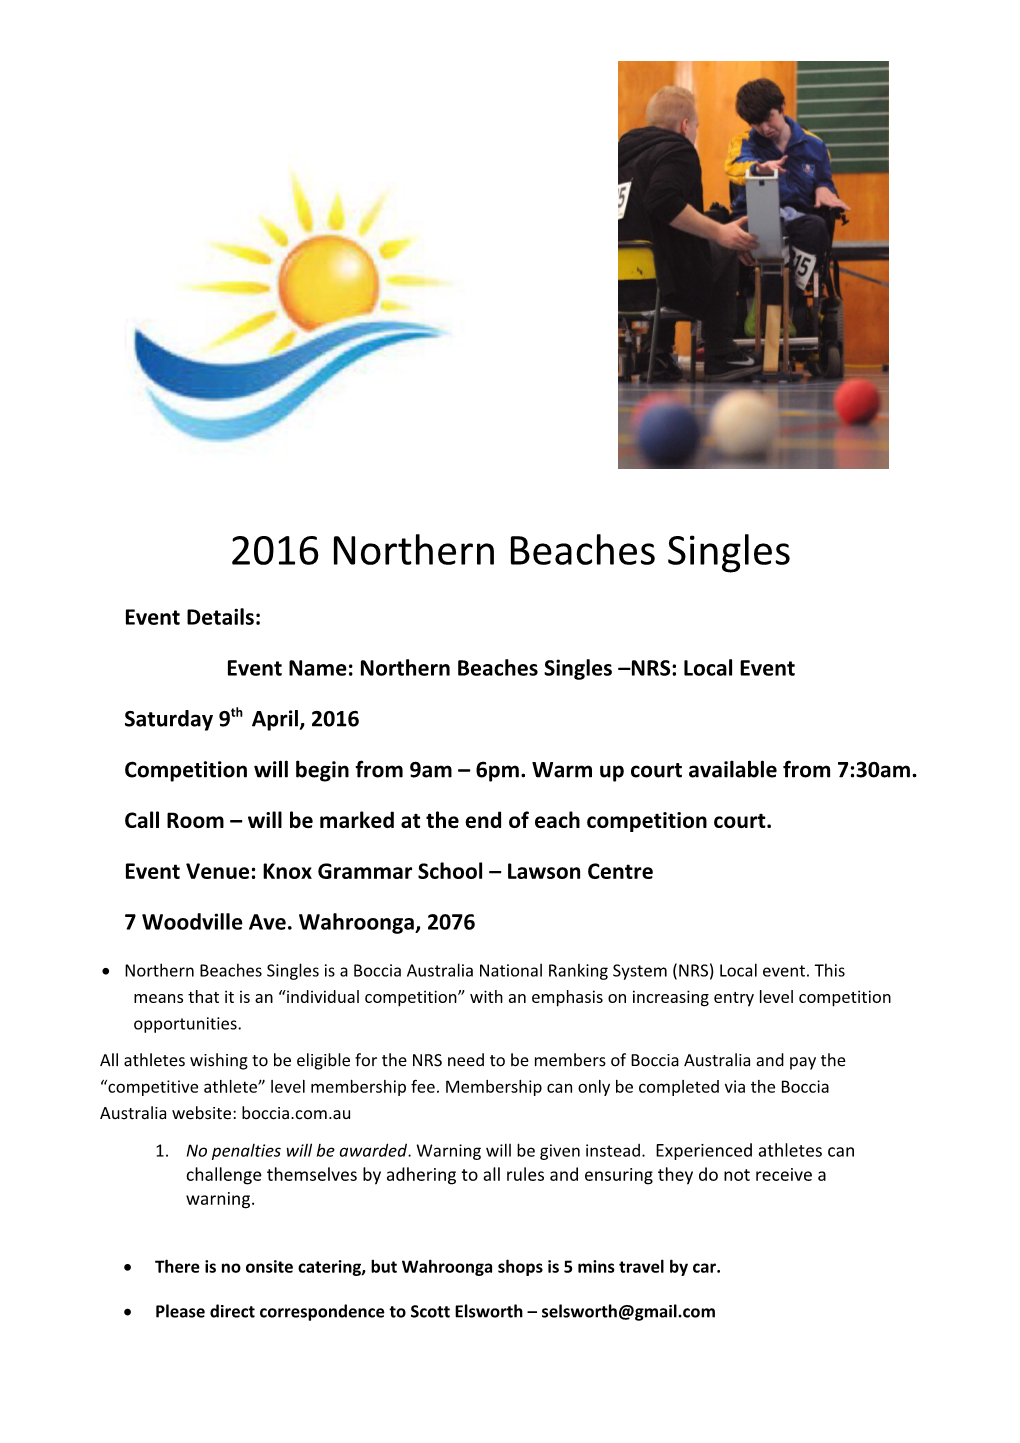 Event Name: Northern Beaches Singles NRS: Local Event